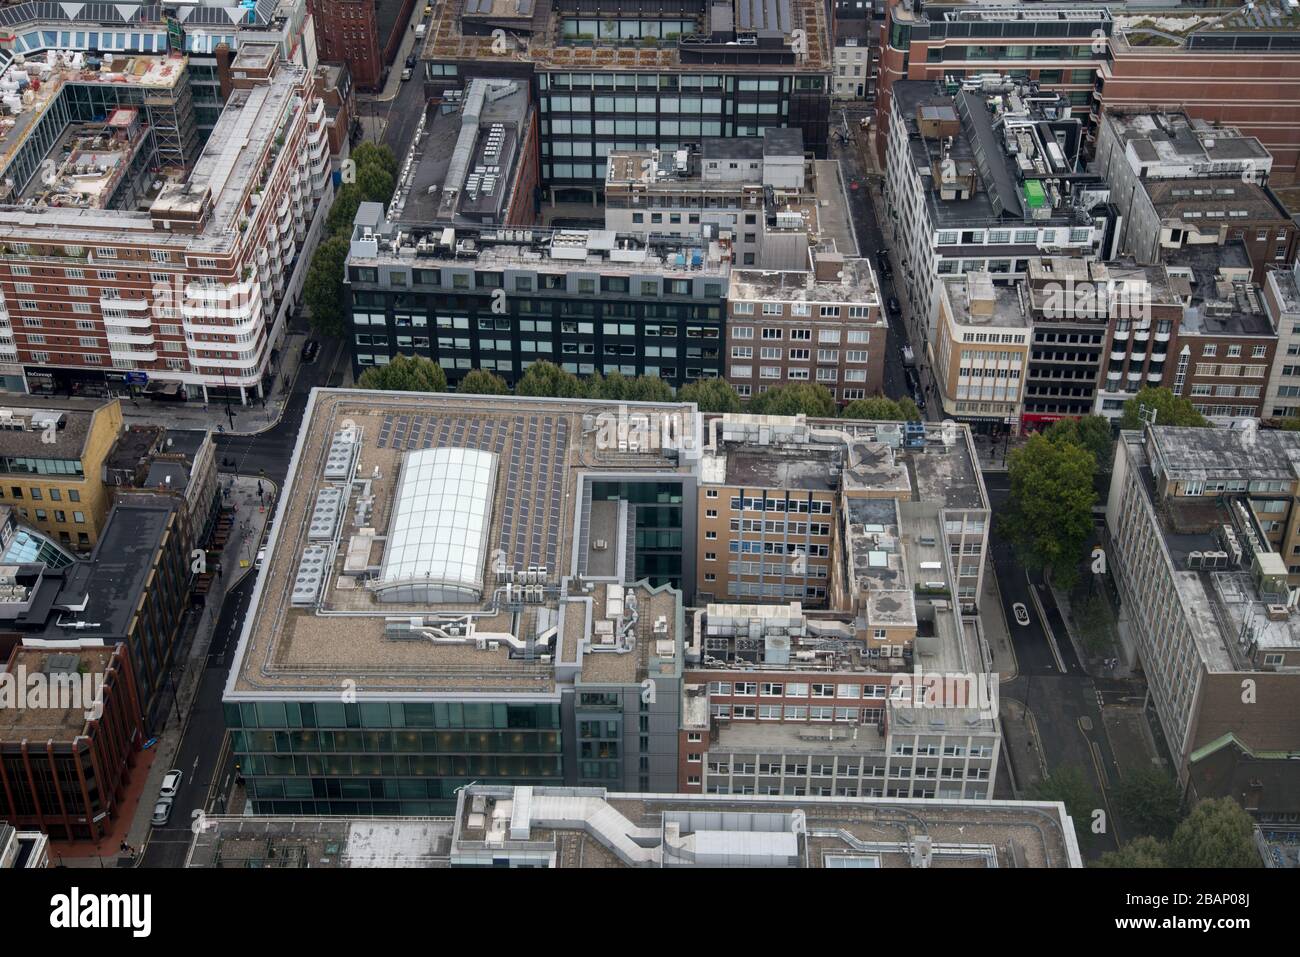 Aerial View of 90 Whitefield Street EPR Architects Maple Street from the BT Tower, 60 Cleveland St, Fitzrovia, London W1T 4JZ Stock Photo